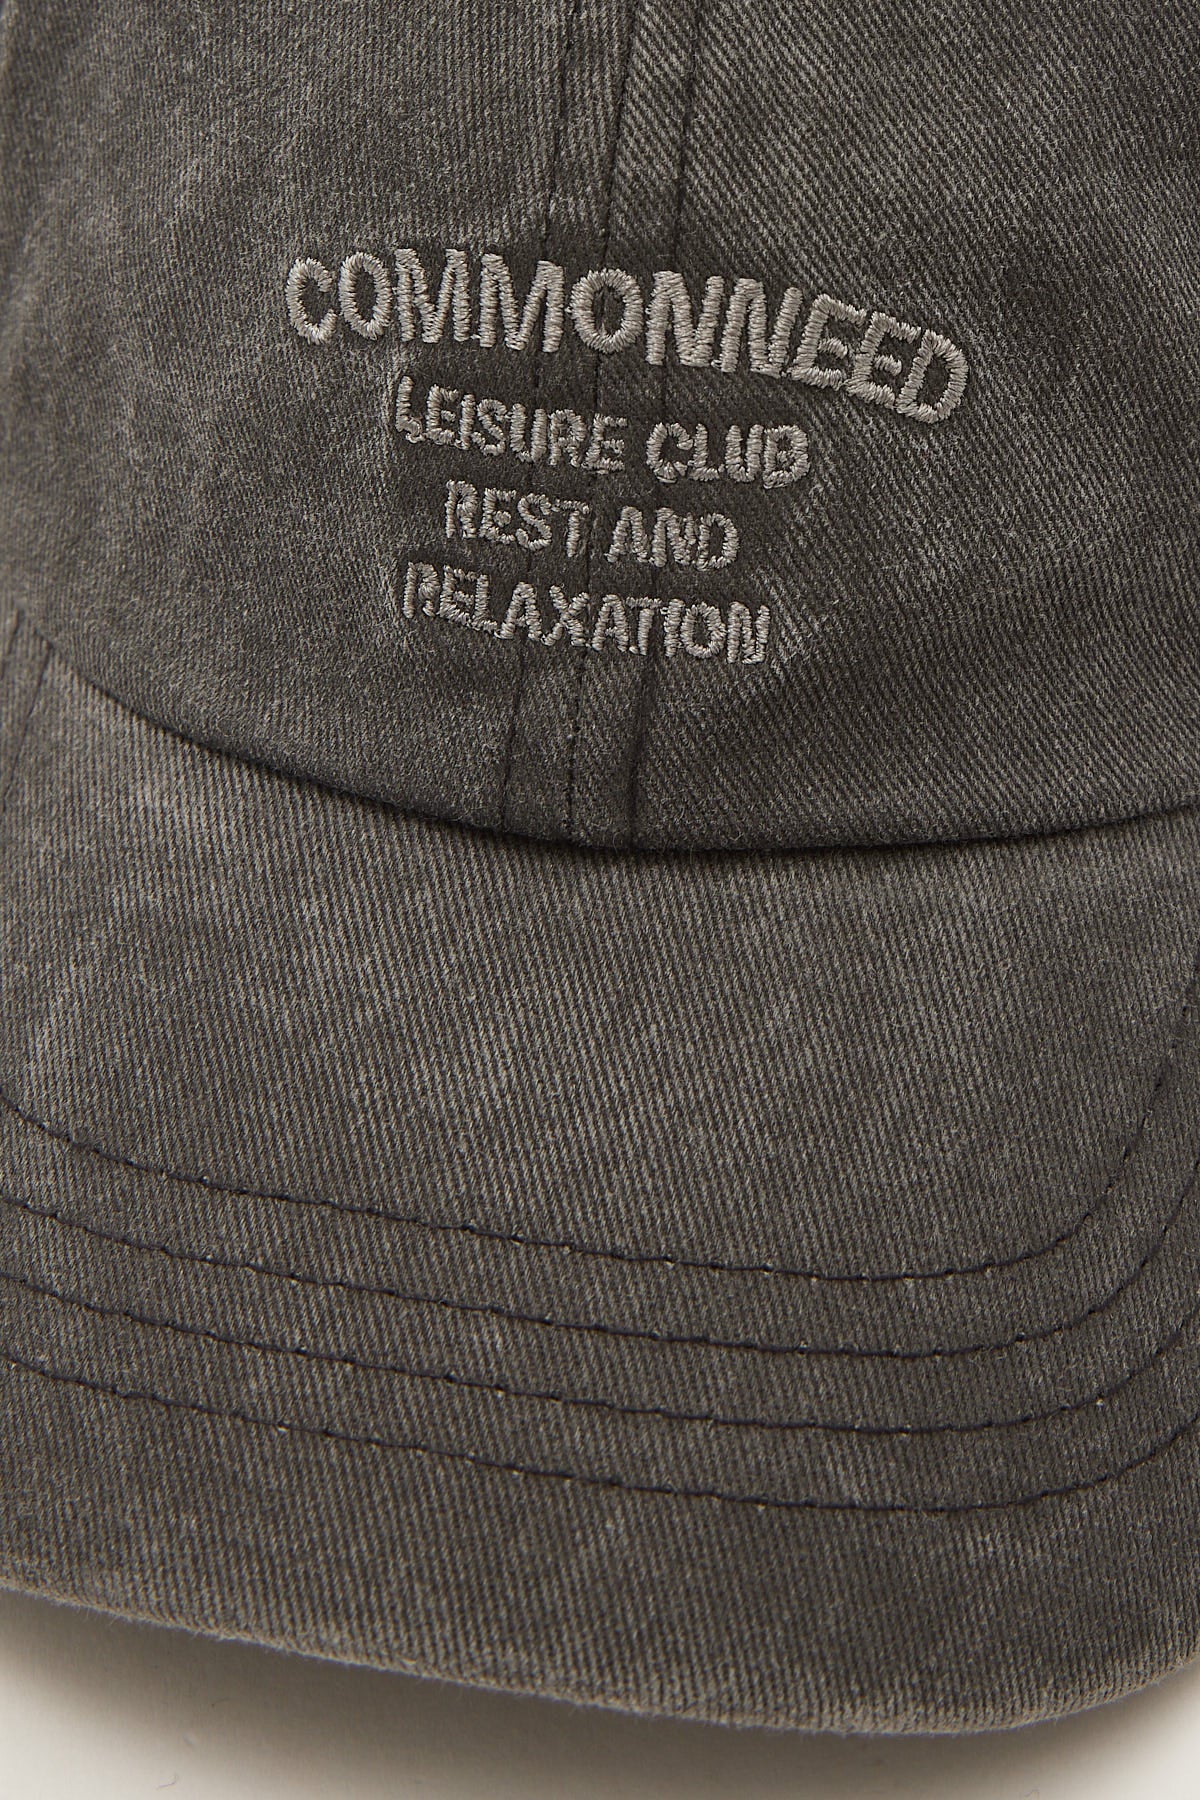 Common Need Relaxation Dad Cap Washed Black